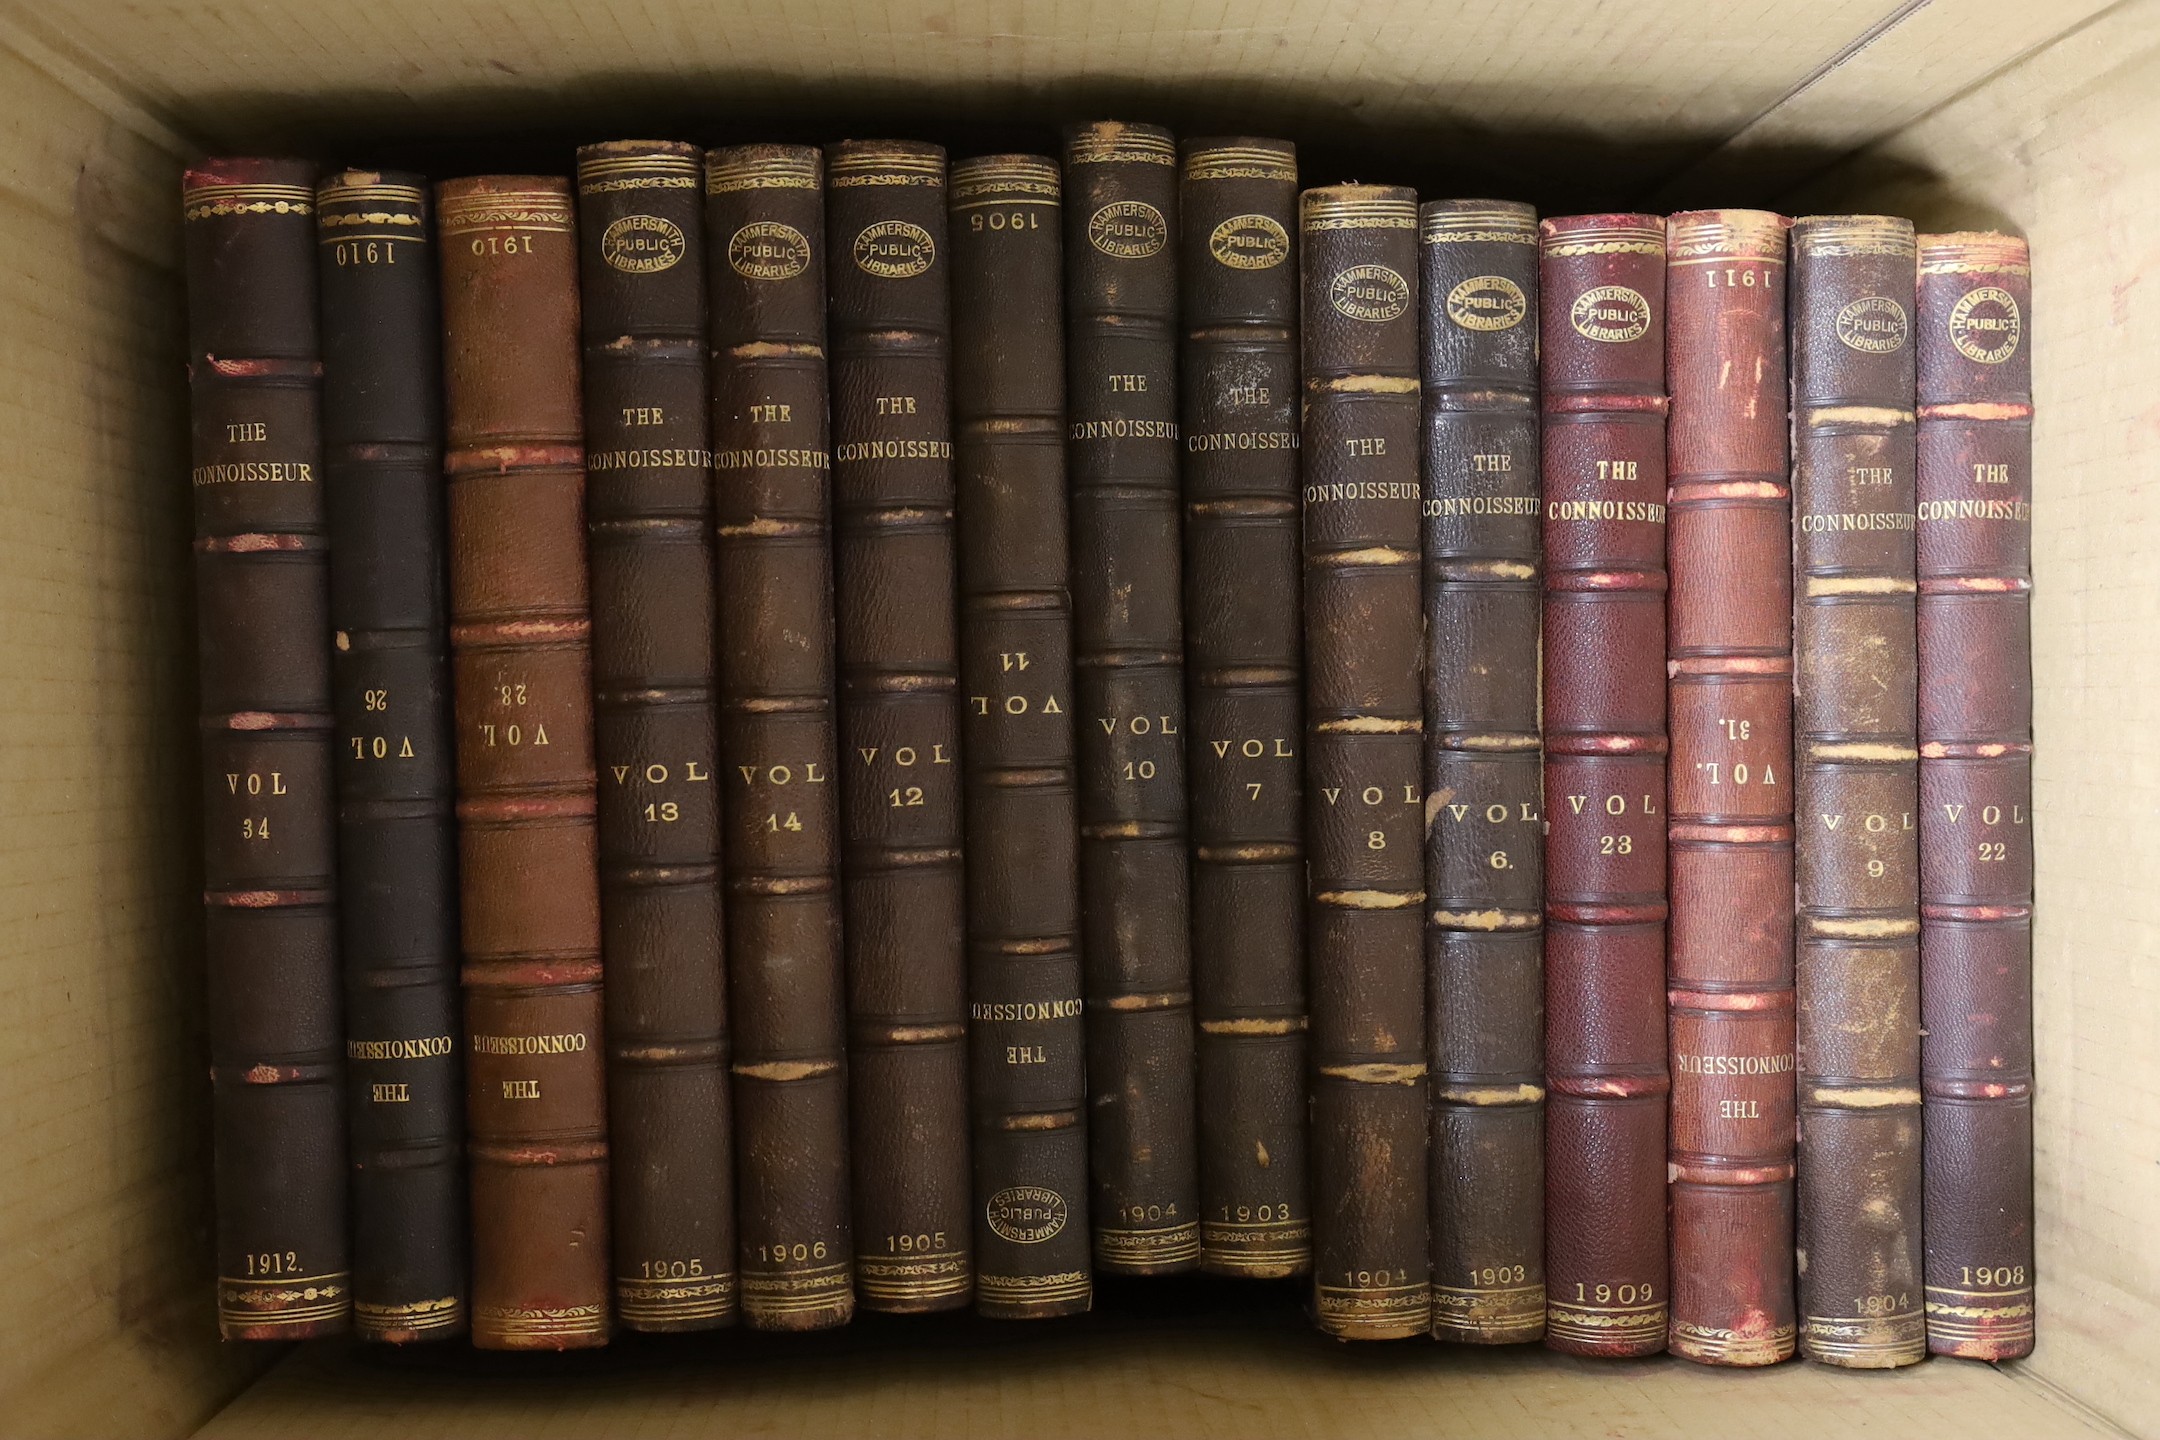 The Connoisseur magazine 1903 to 1913 in 33 leather bindings